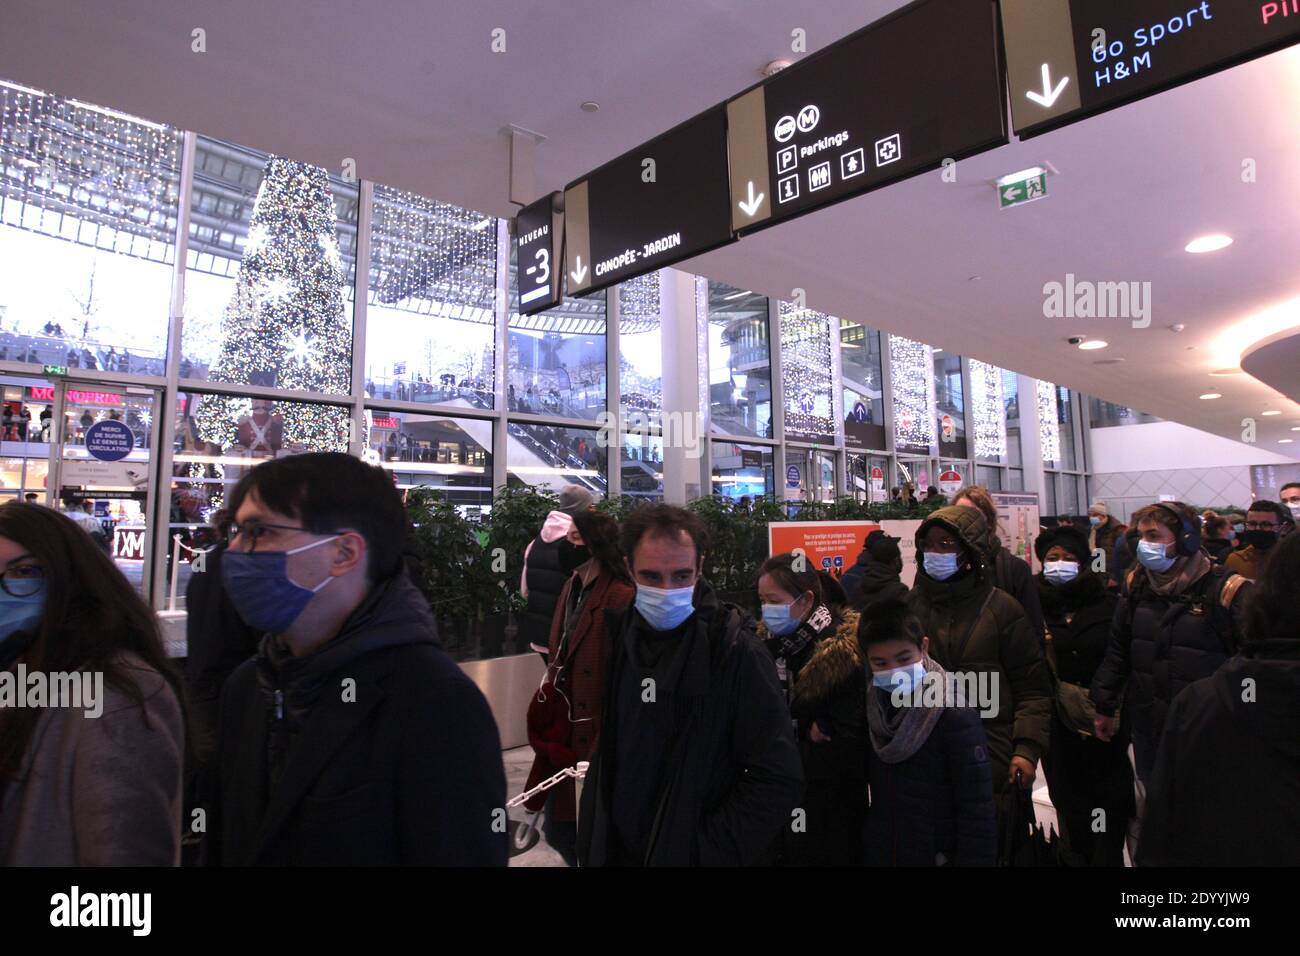 Paris, France. 28th Dec, 2020. Choppers wearing protective face masks against the Covid-19 wait in line to enter a store at the Les Halles amid the coronavirus pandemic on December 28, 2020 in Paris, France. According the latest report of the French National Authority for Health (HAS) 175 people died in hospital, and 8,822 new cases of Covid-19 infection, strict measures are still in place as curfew from 8:00 p.m. to 6:00 a.m. was put in place in all territory French. (Photo by Paulo Amorim/Sipa USA) Credit: Sipa USA/Alamy Live News Stock Photo